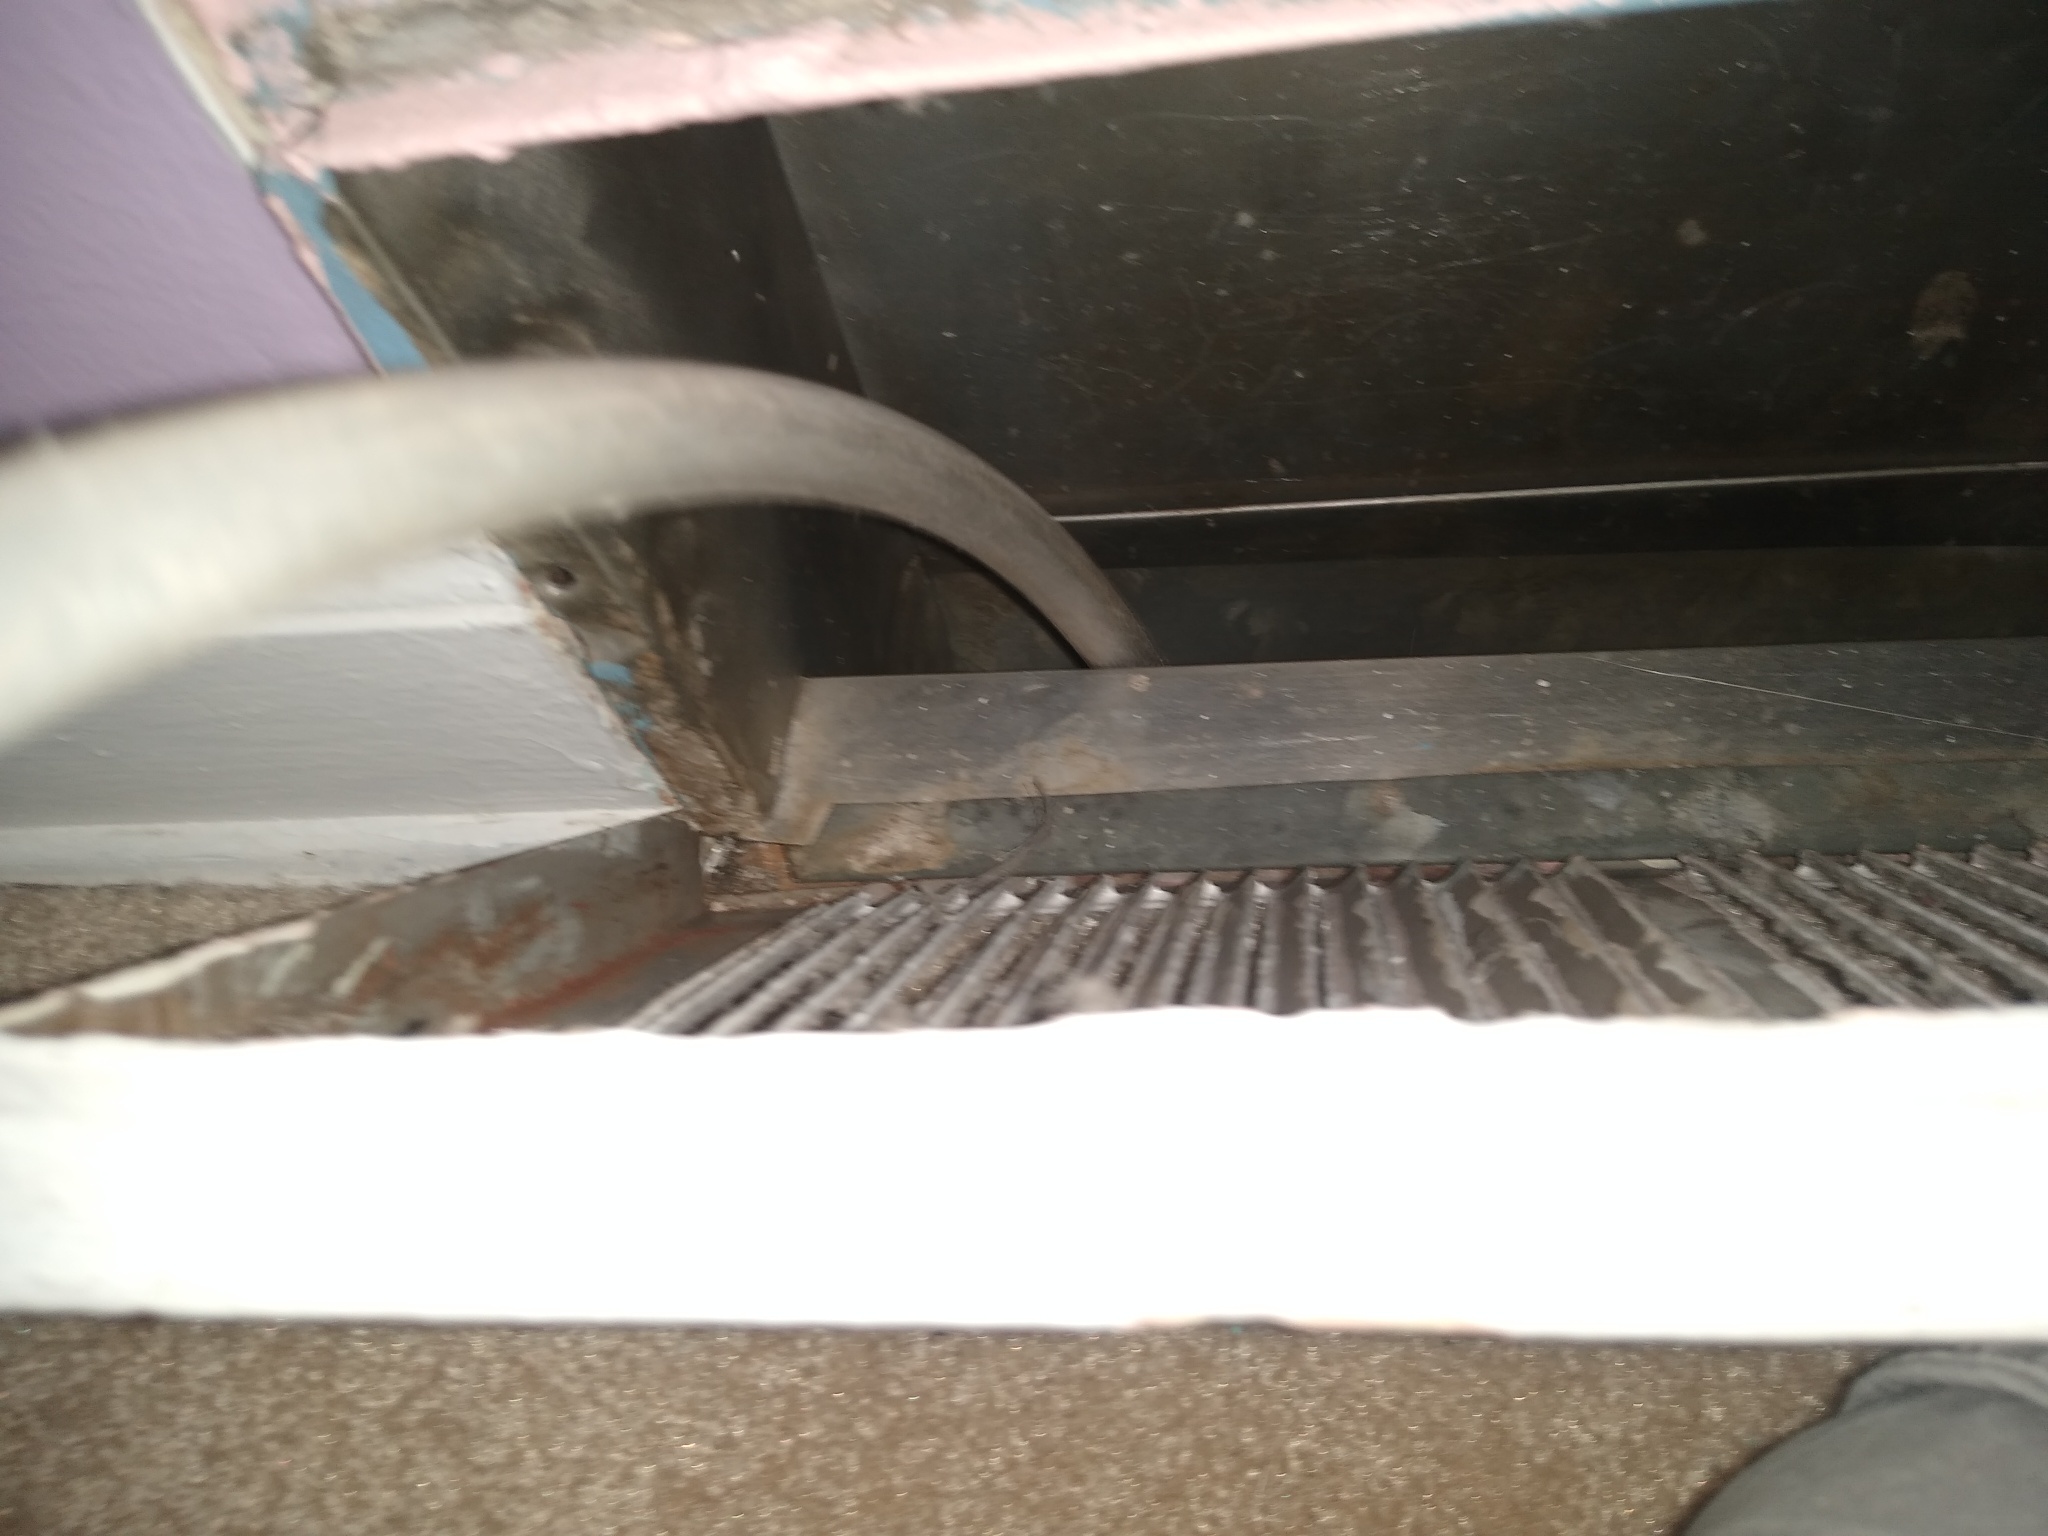 duct cleaning chicago